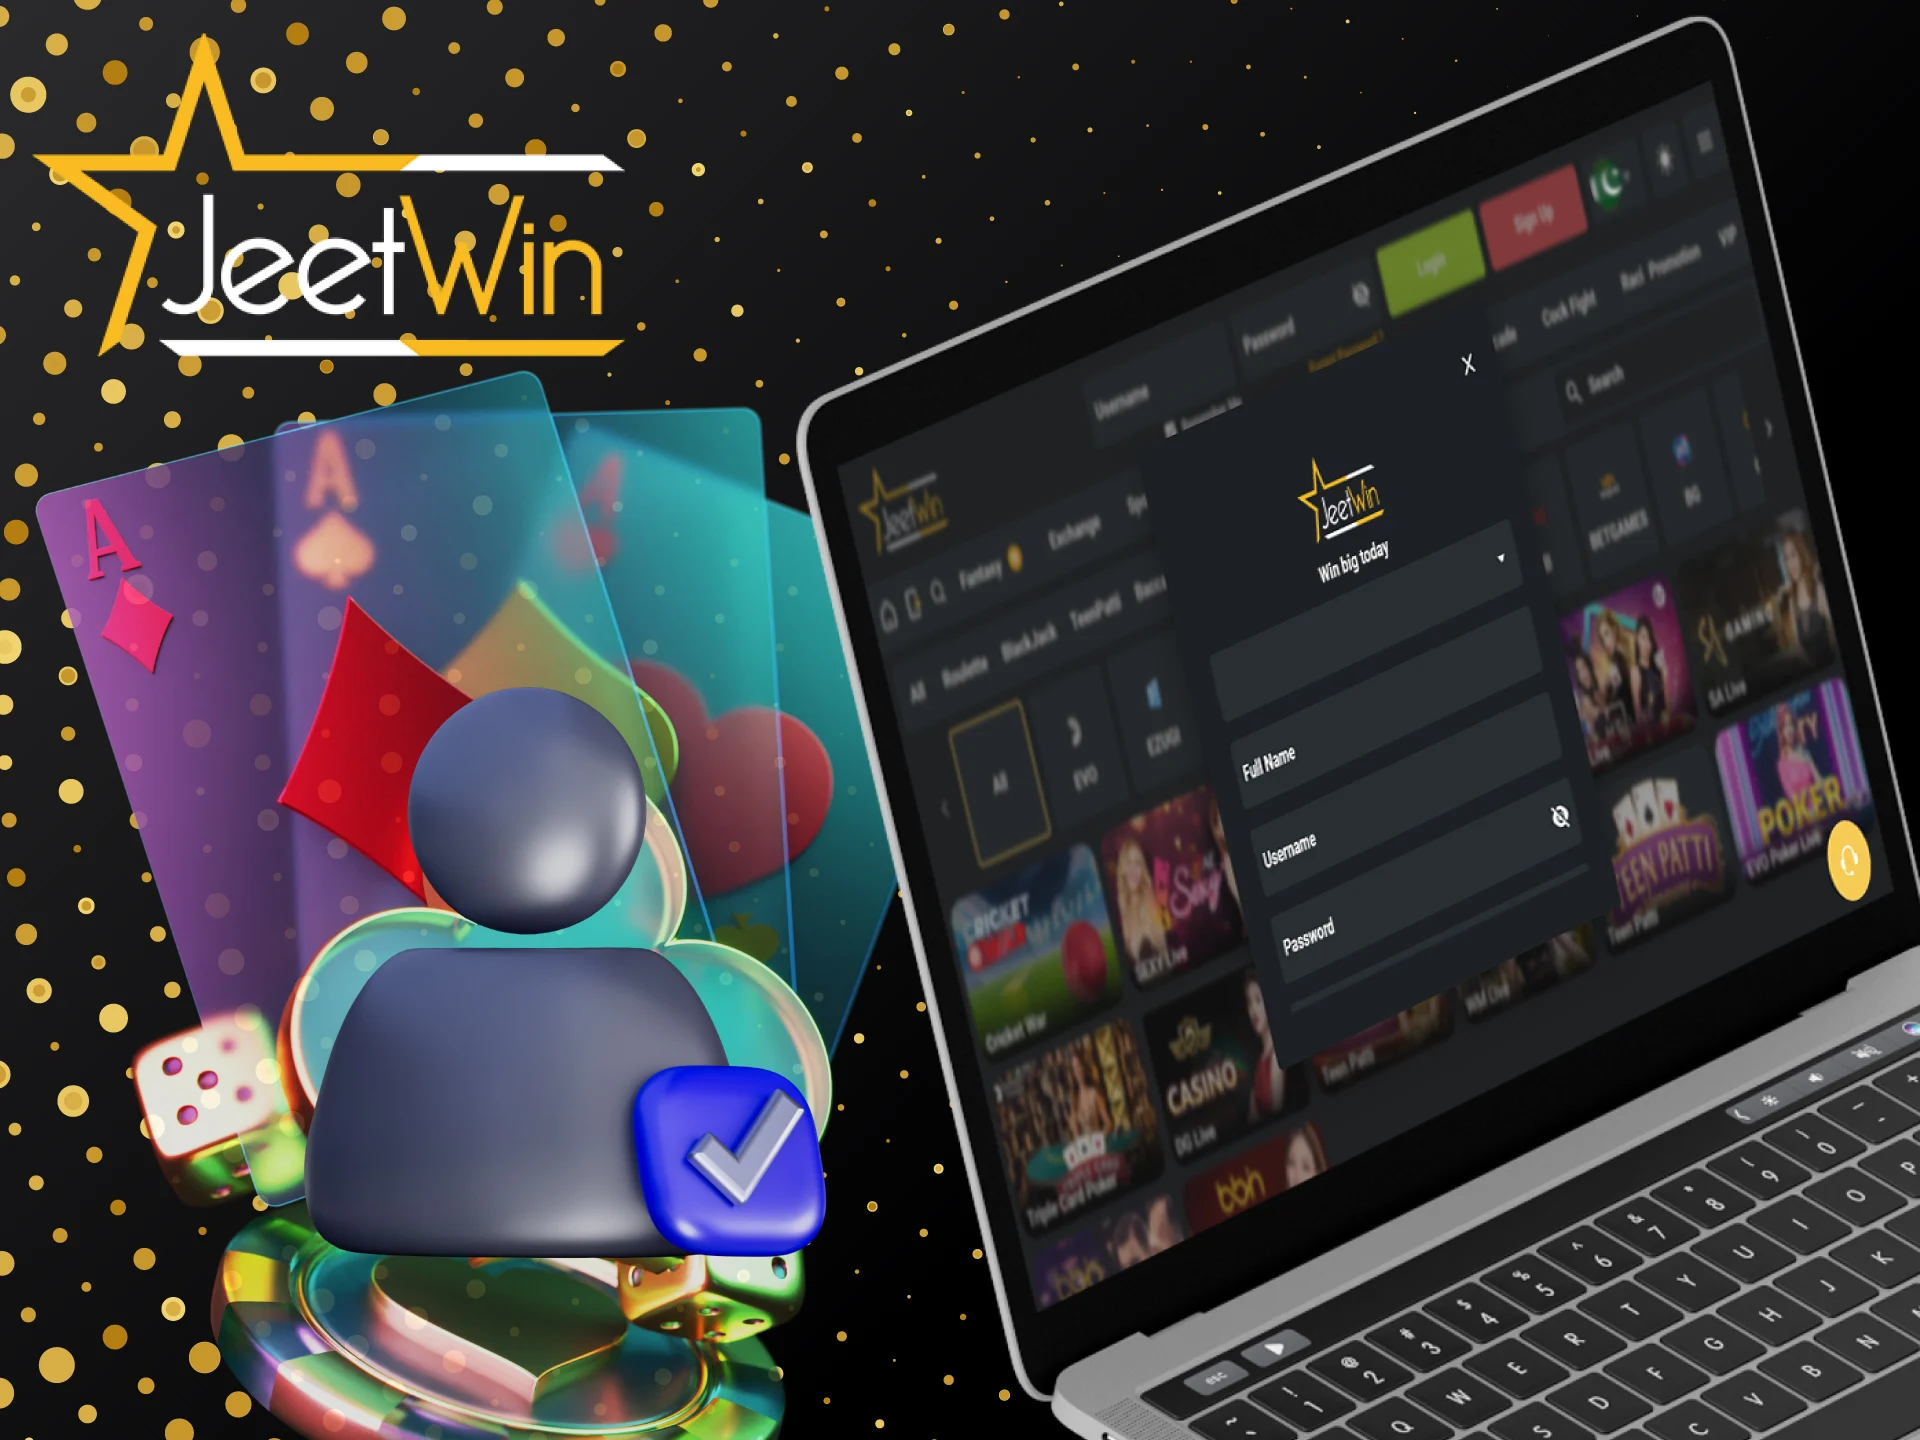 Join JeetWin, choose your favorite type of blackjack and enjoy the game.